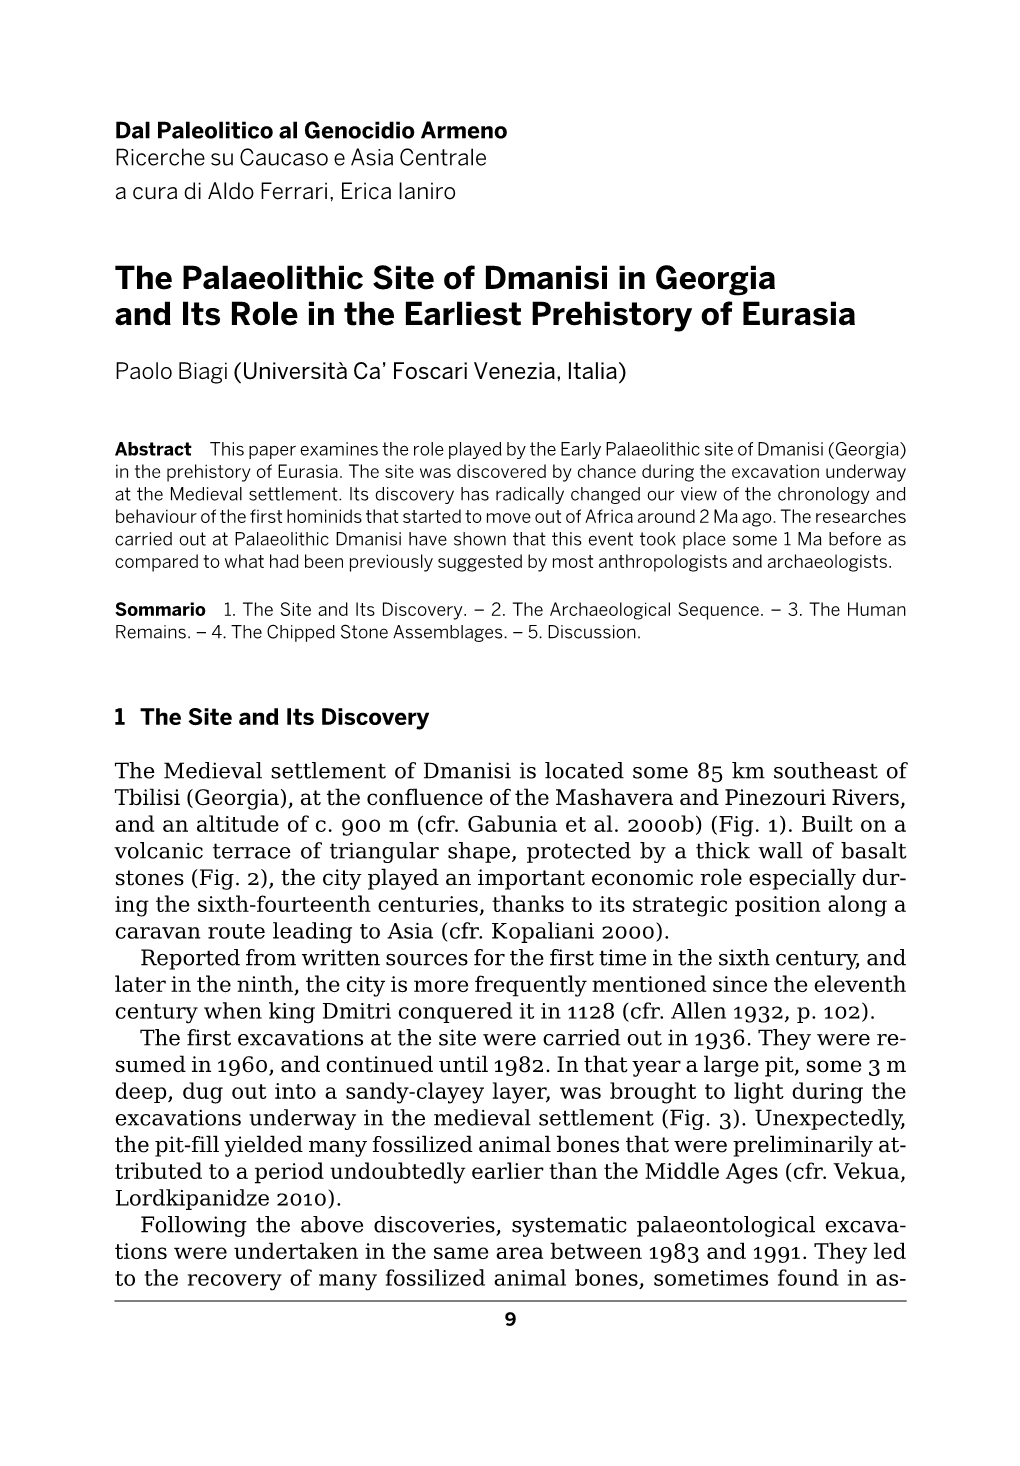 The Palaeolithic Site of Dmanisi in Georgia and Its Role in the Earliest Prehistory of Eurasia